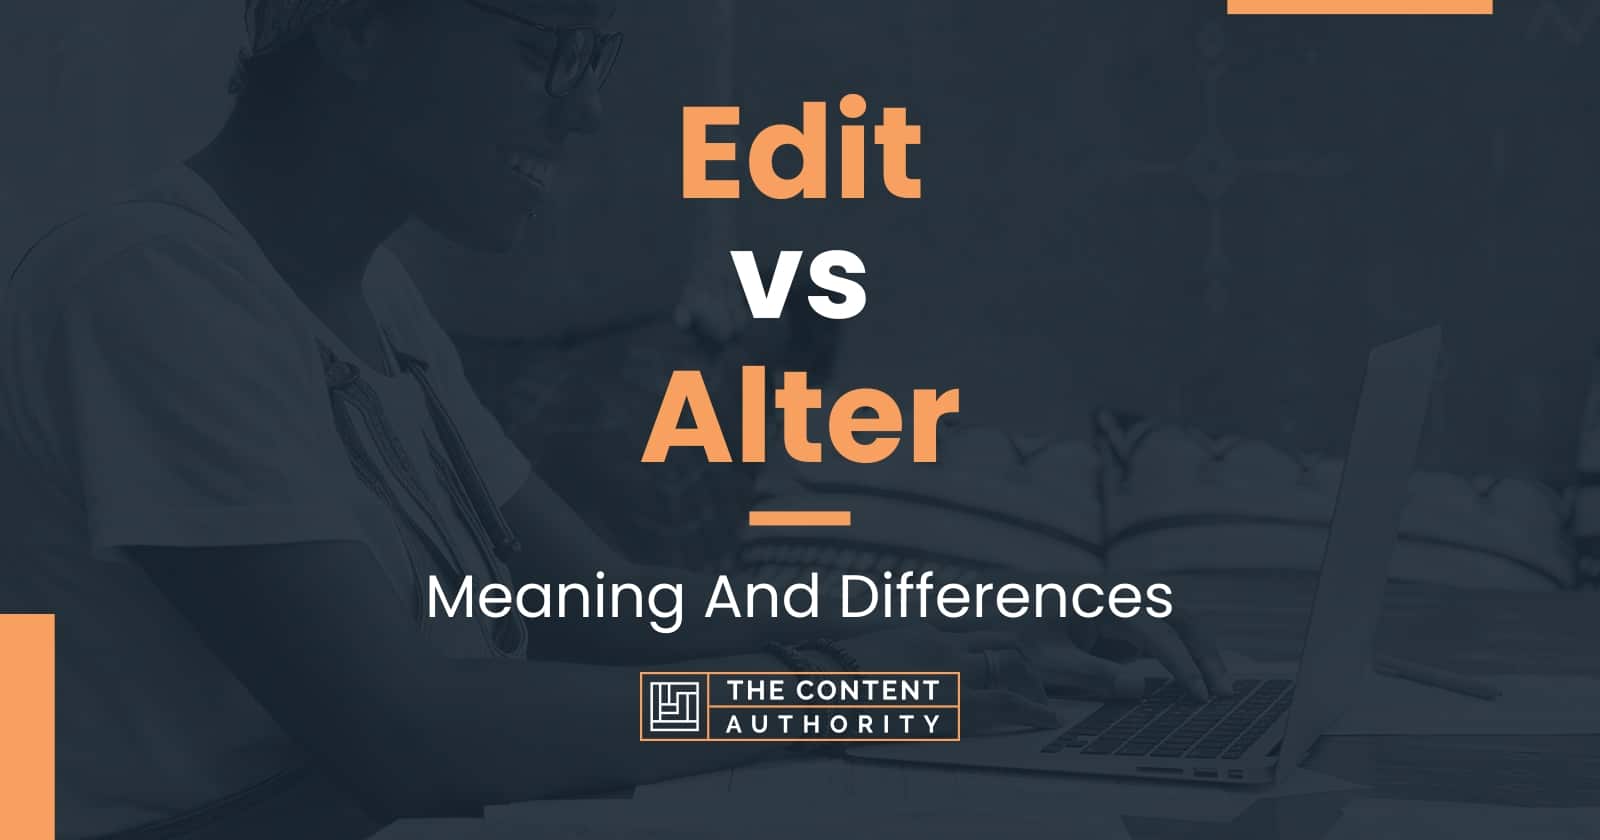 Edit vs Alter: Meaning And Differences